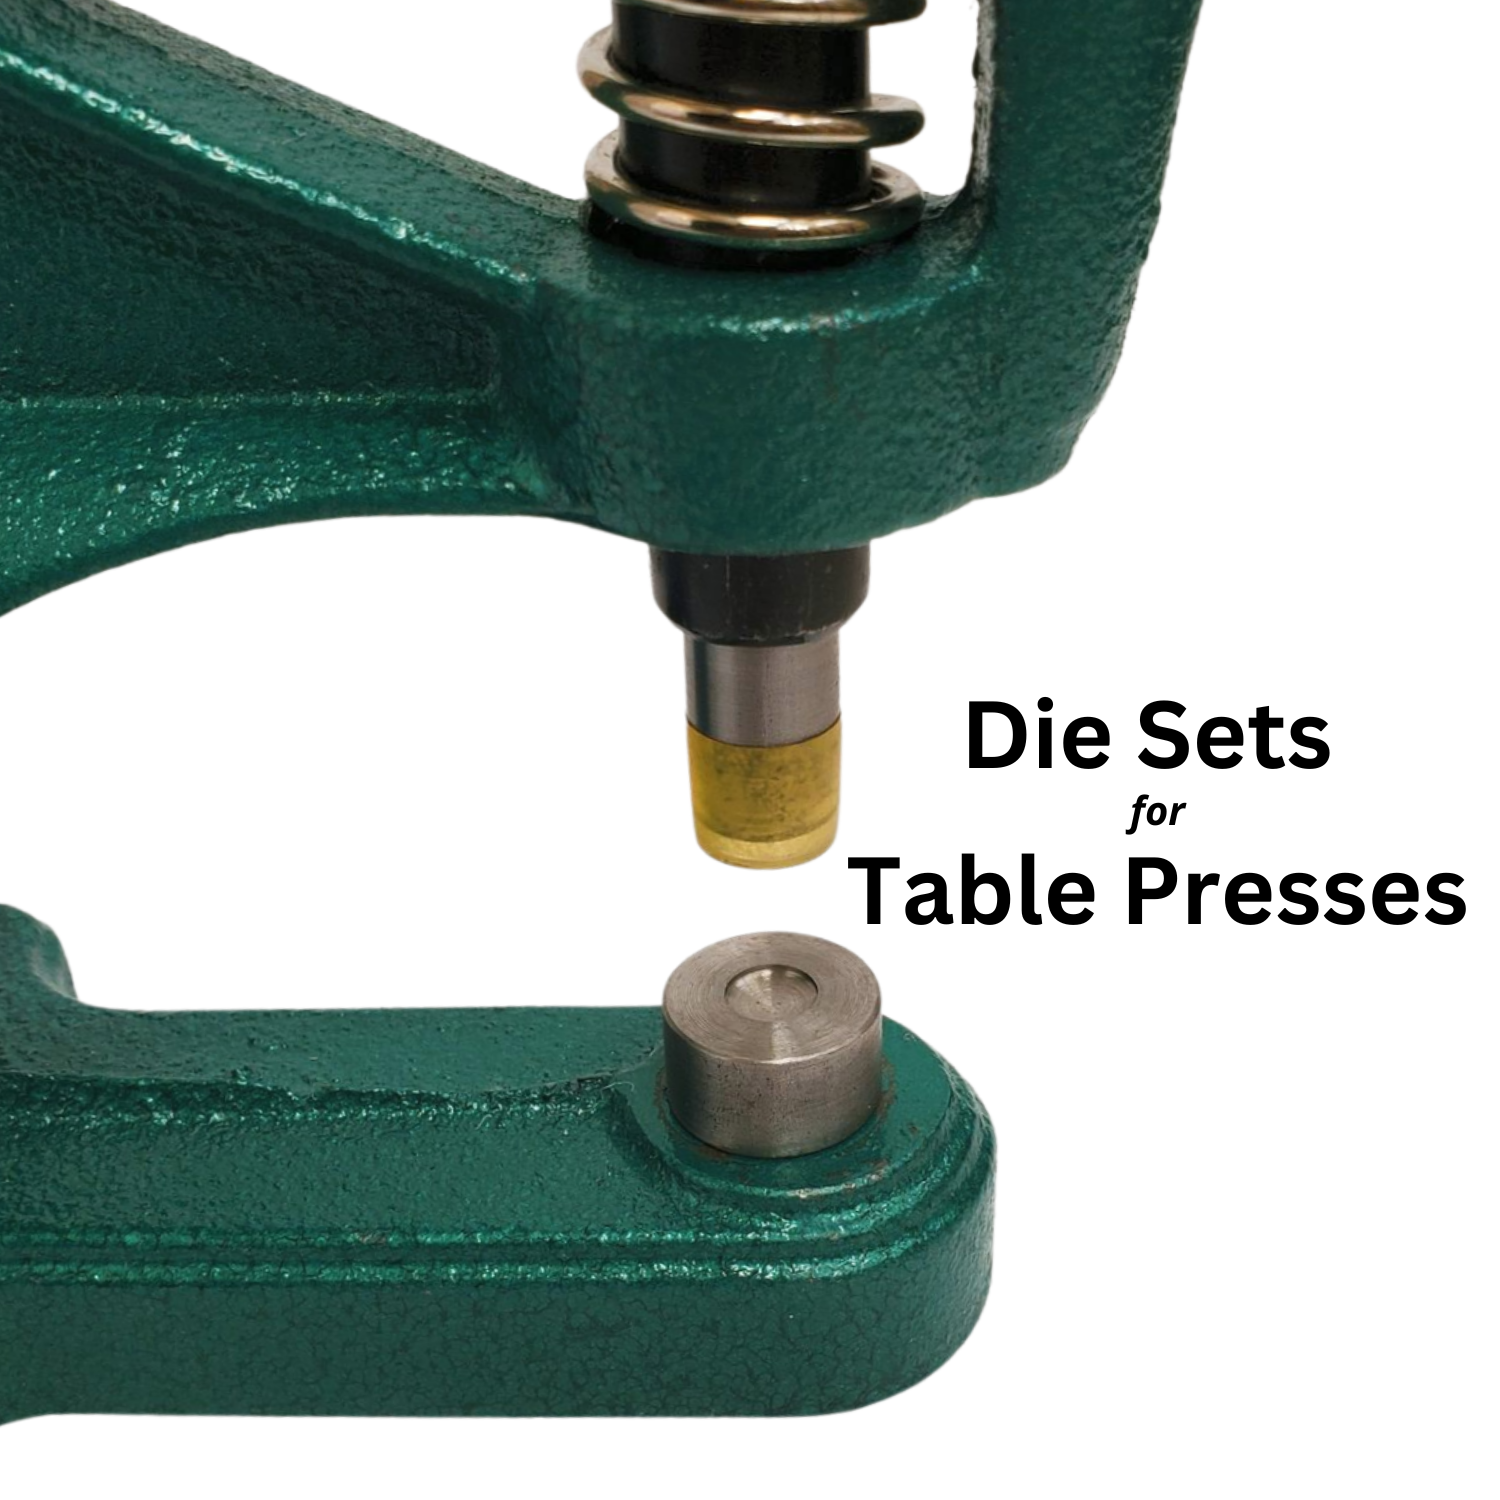 Die Sets (for Table Presses)